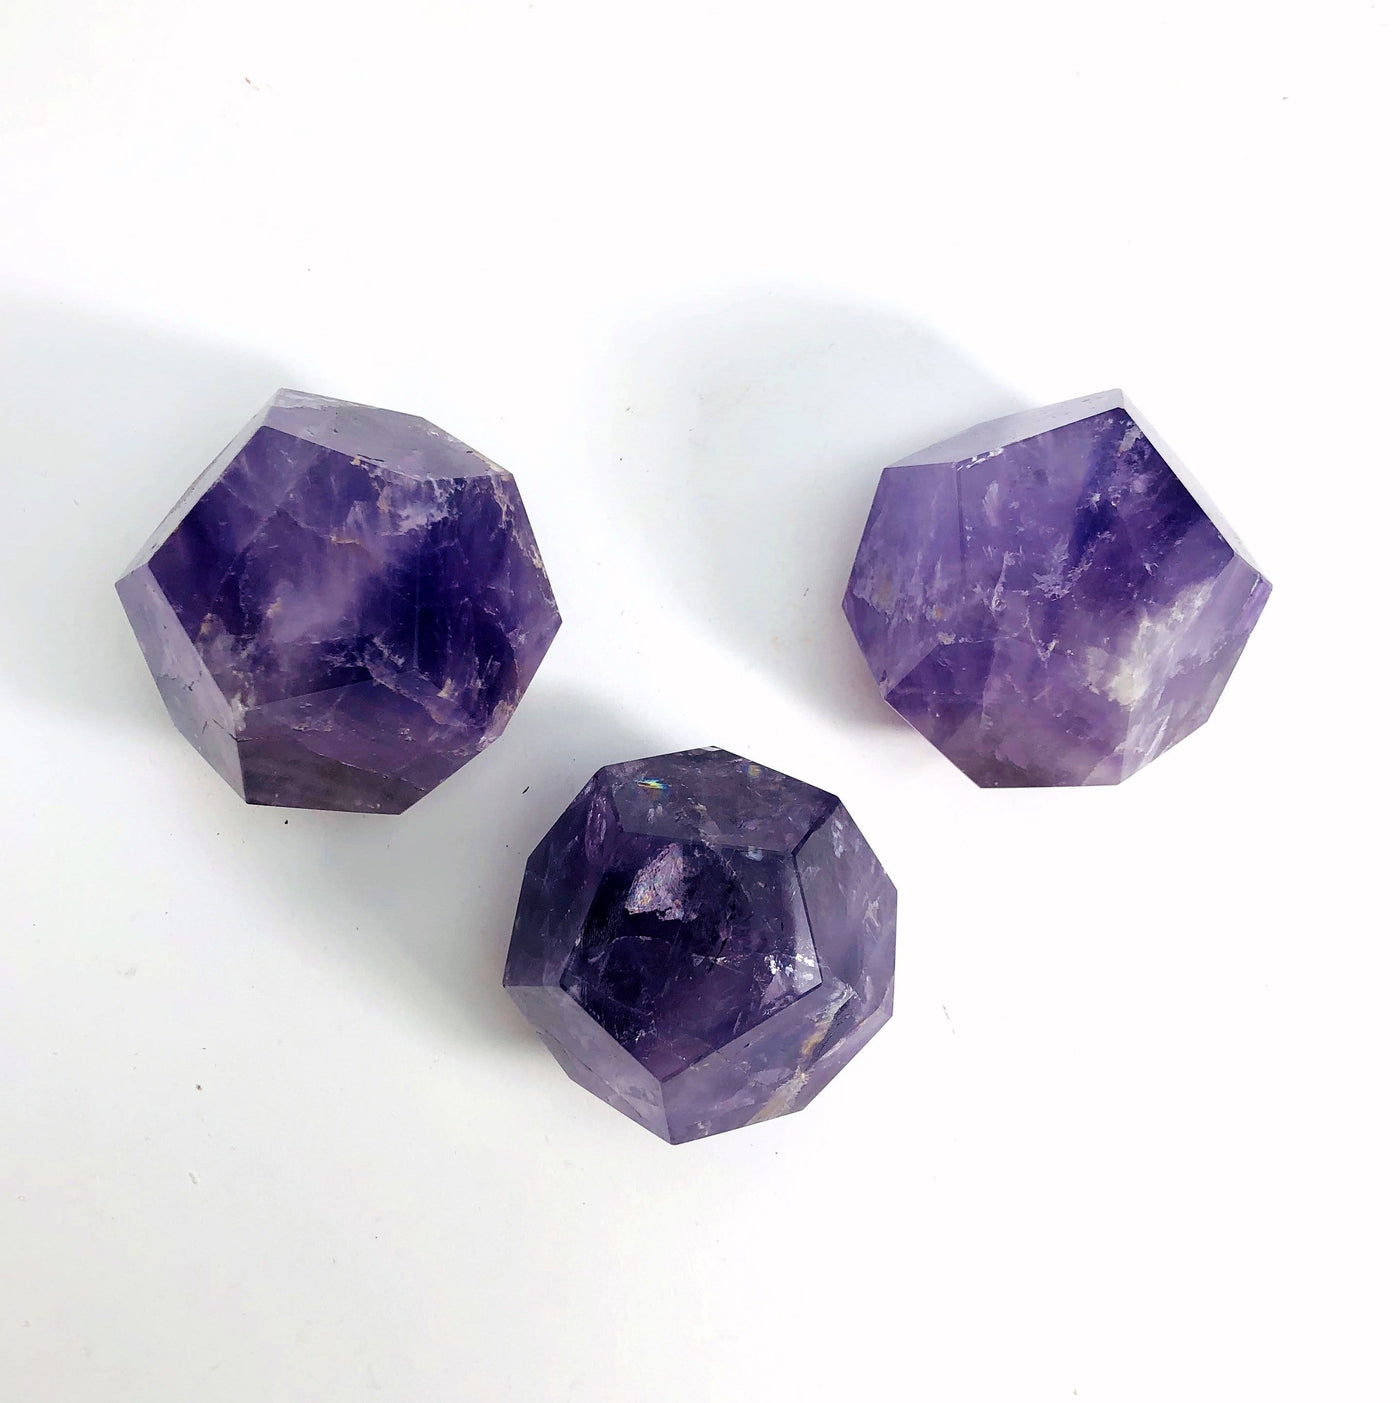 3 Amethyst Dodecahedrons on white background